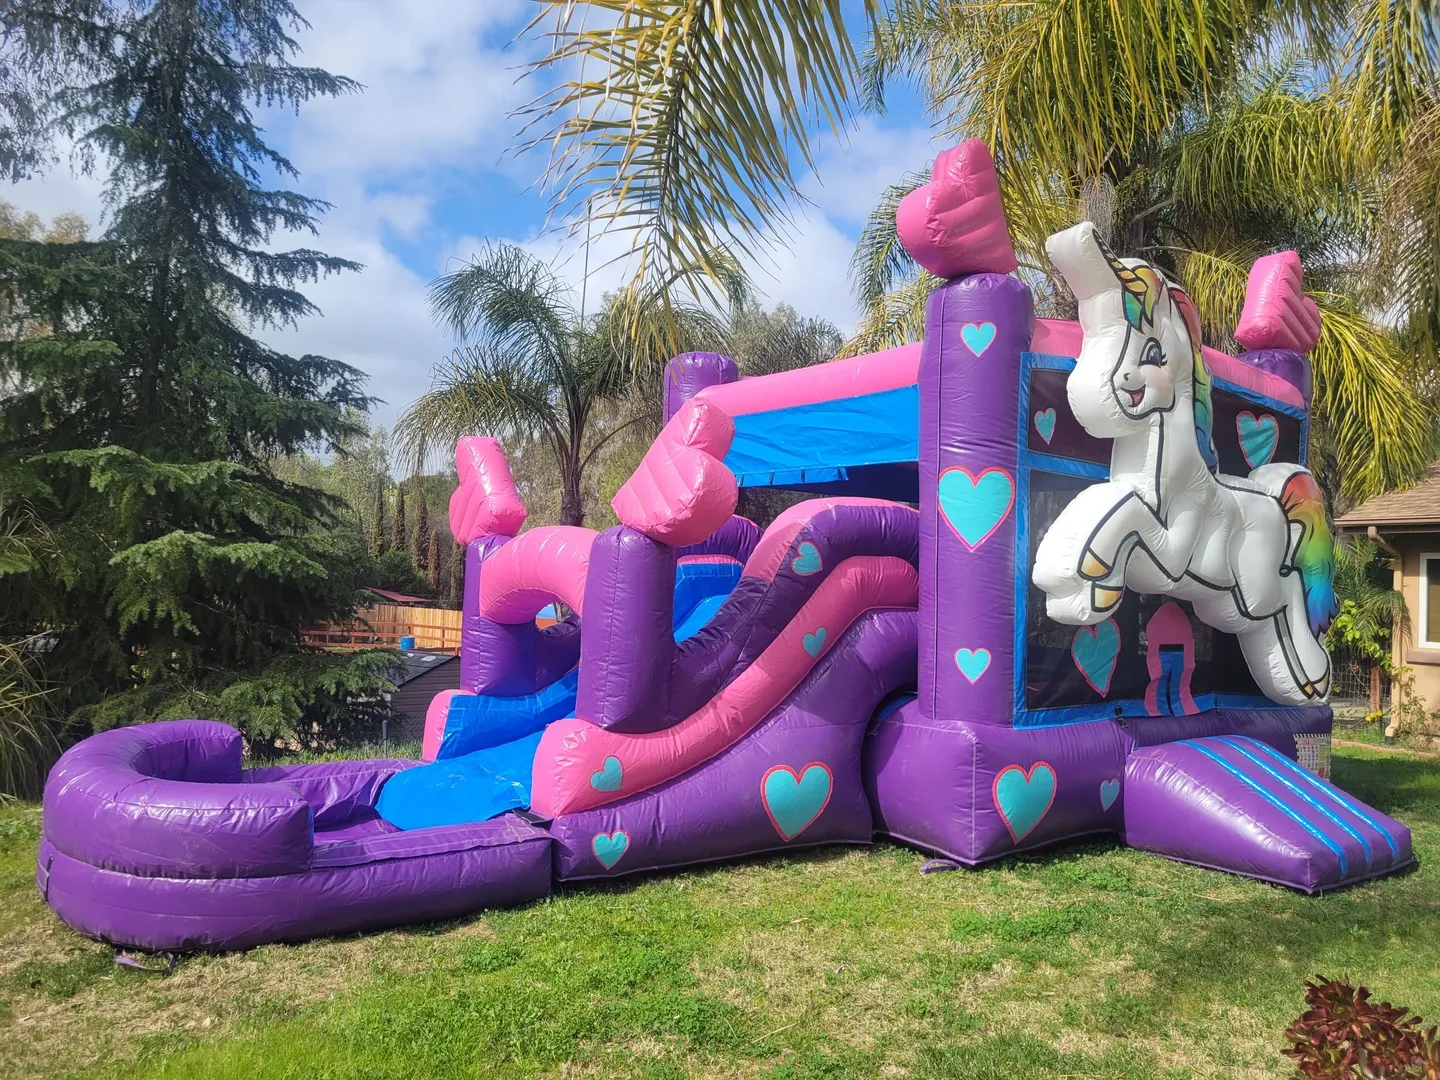 A pink and purple inflatable slide with a unicorn on it.